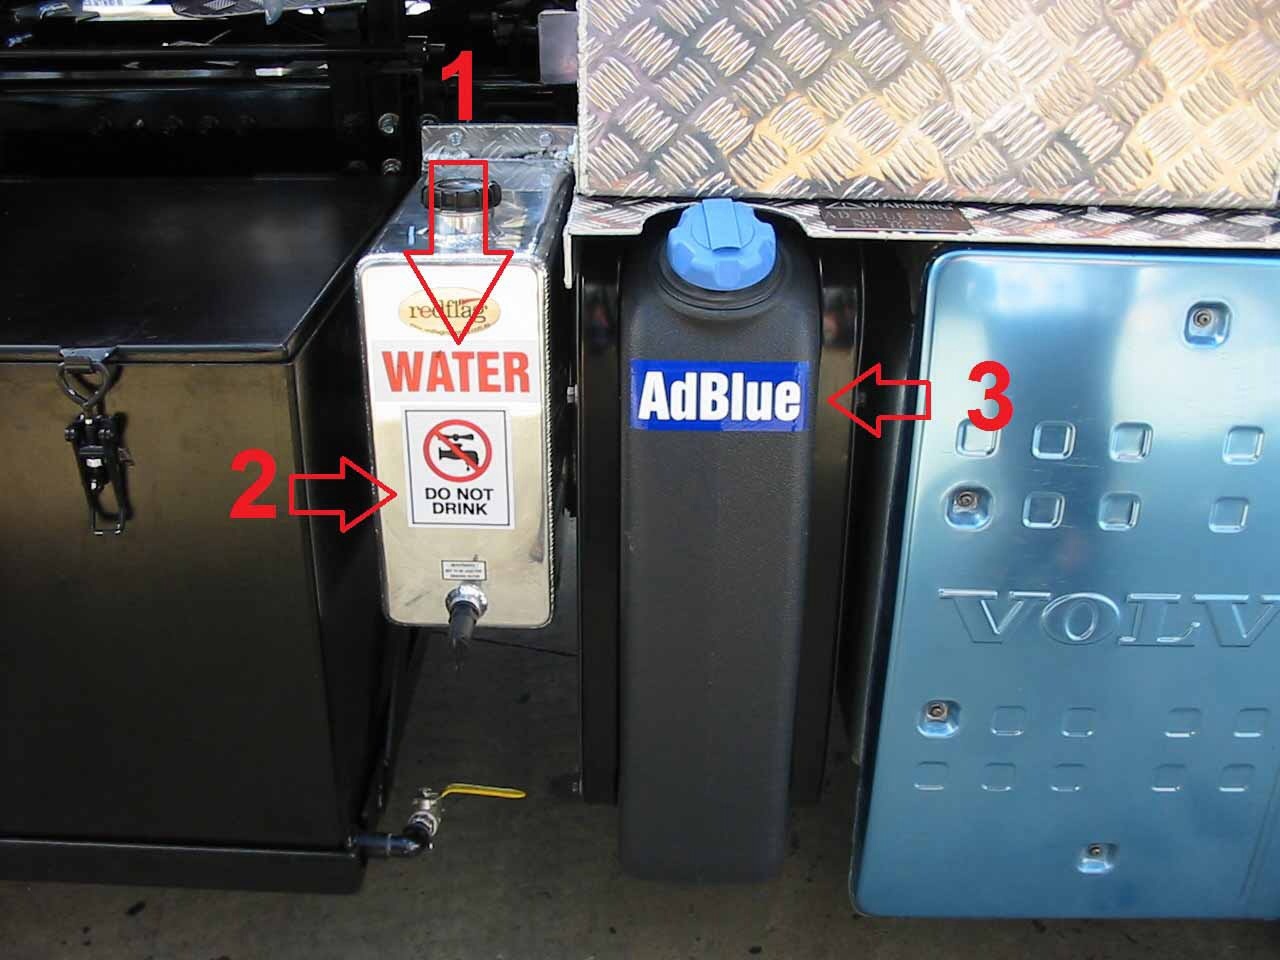 WATER AND ADBLUE